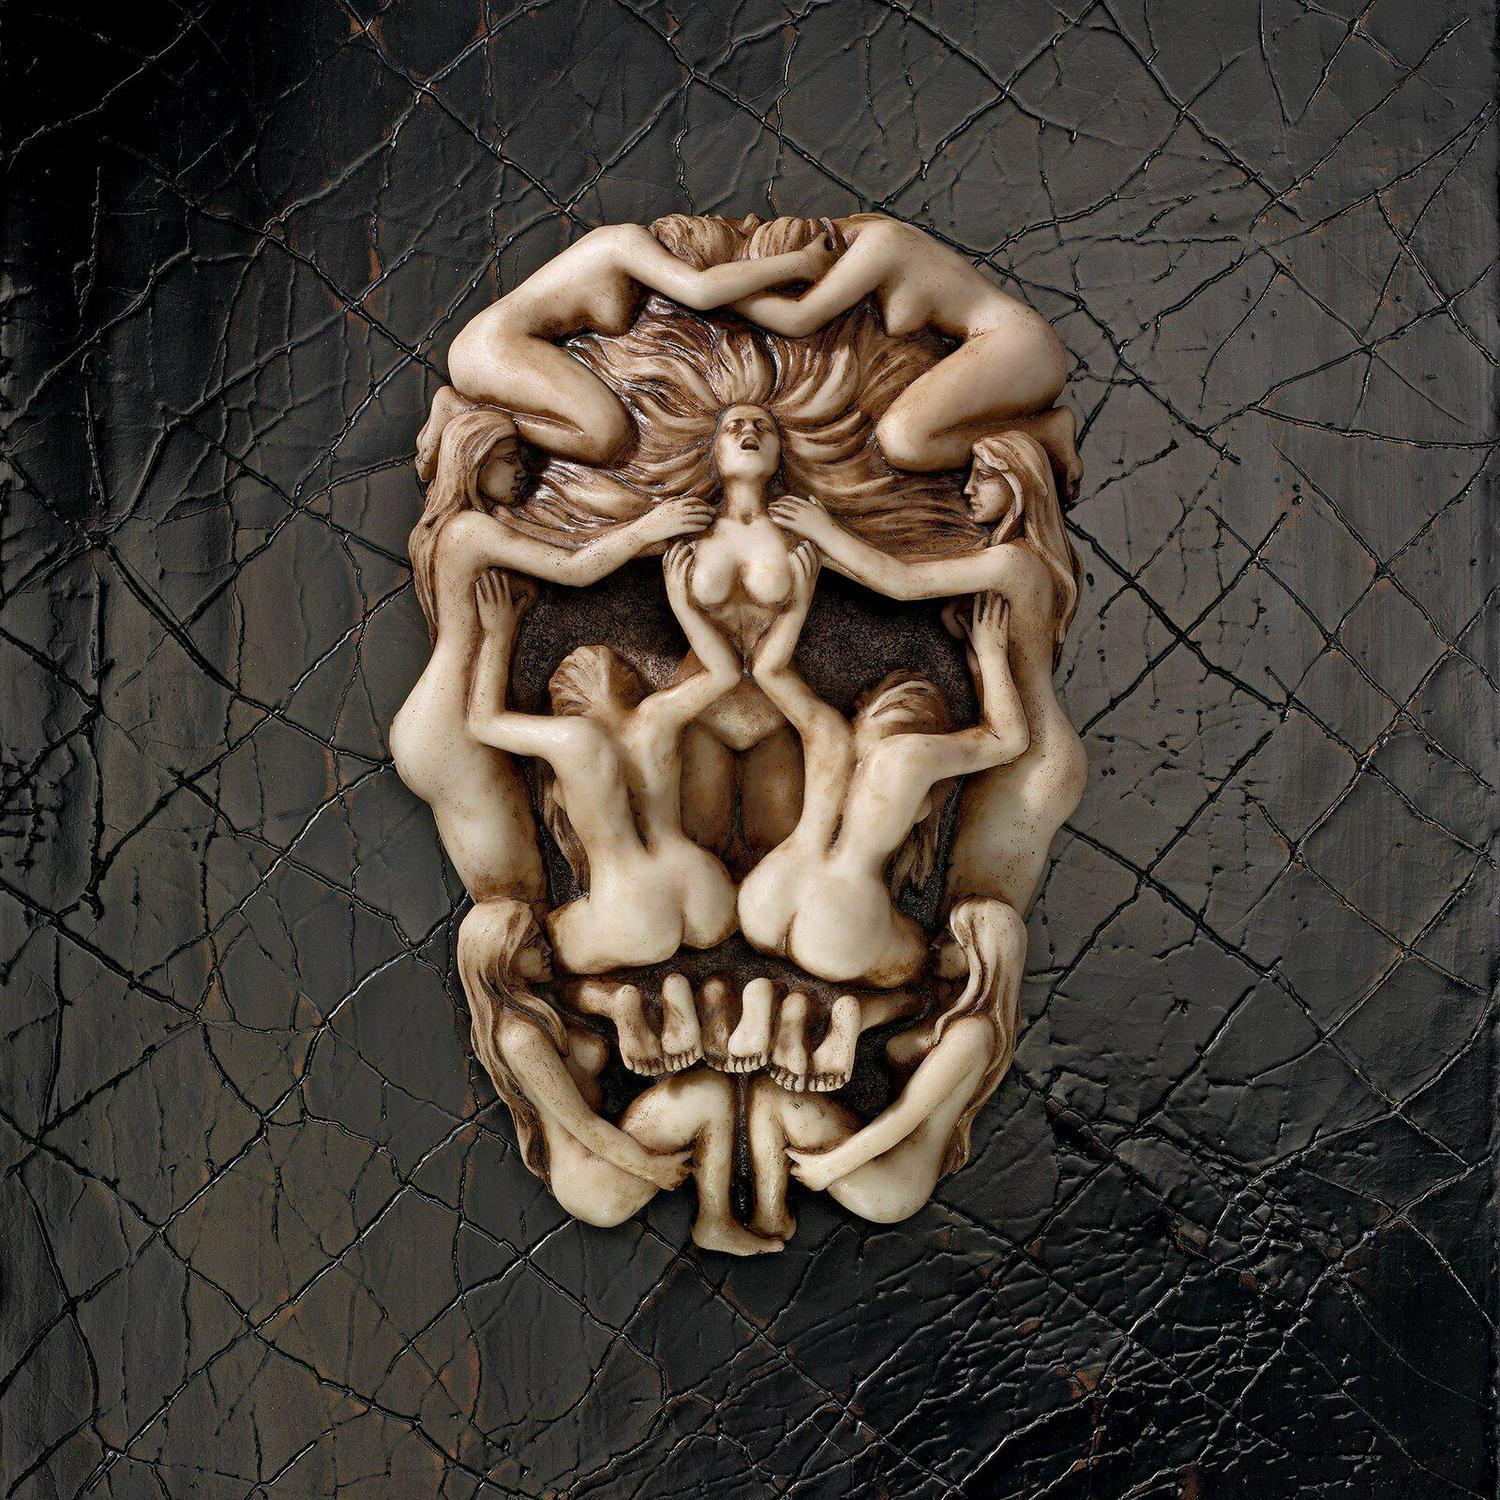 Gothic Macabre Death Skull Wall Art Sculpture Detailed 3-D Entwined Nude Women